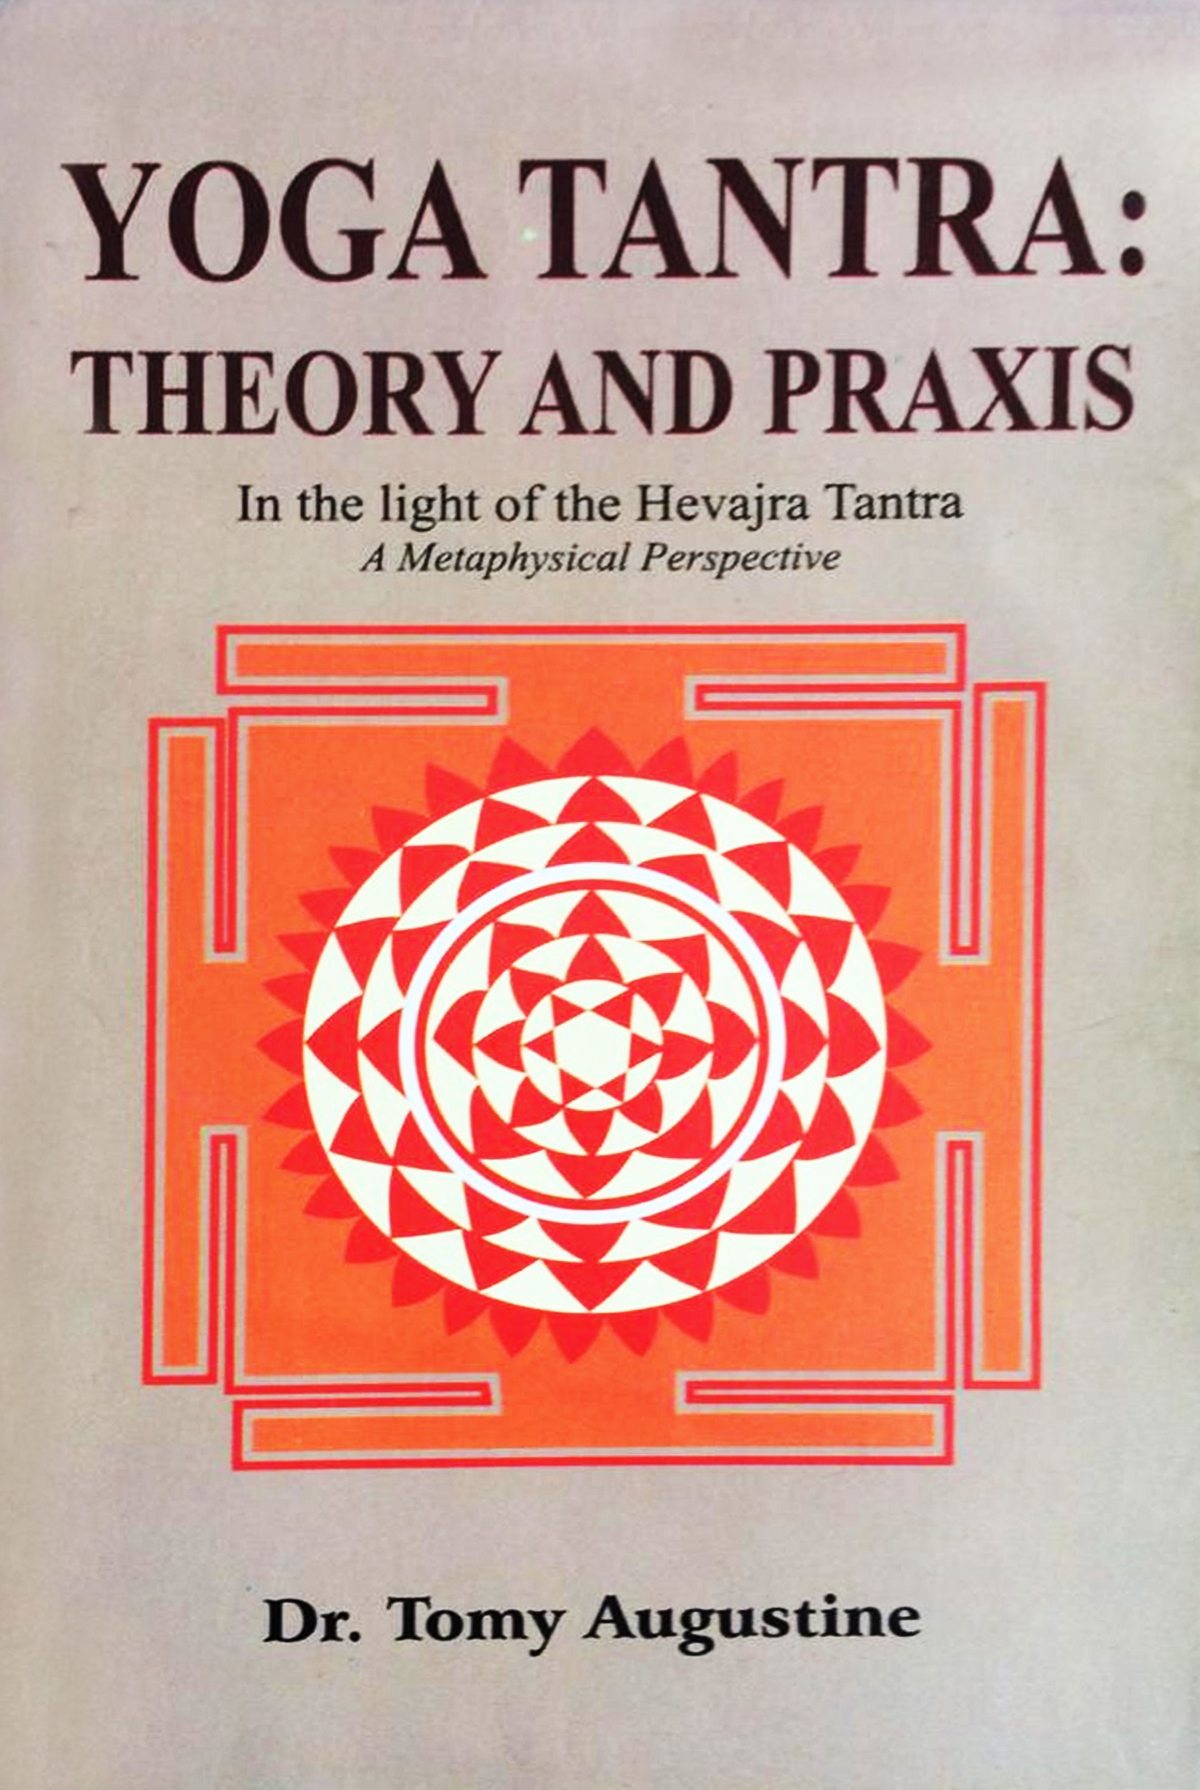 Metaphysics of Yoga Tantra : Theory & Praxis in the Hevajra Tantra